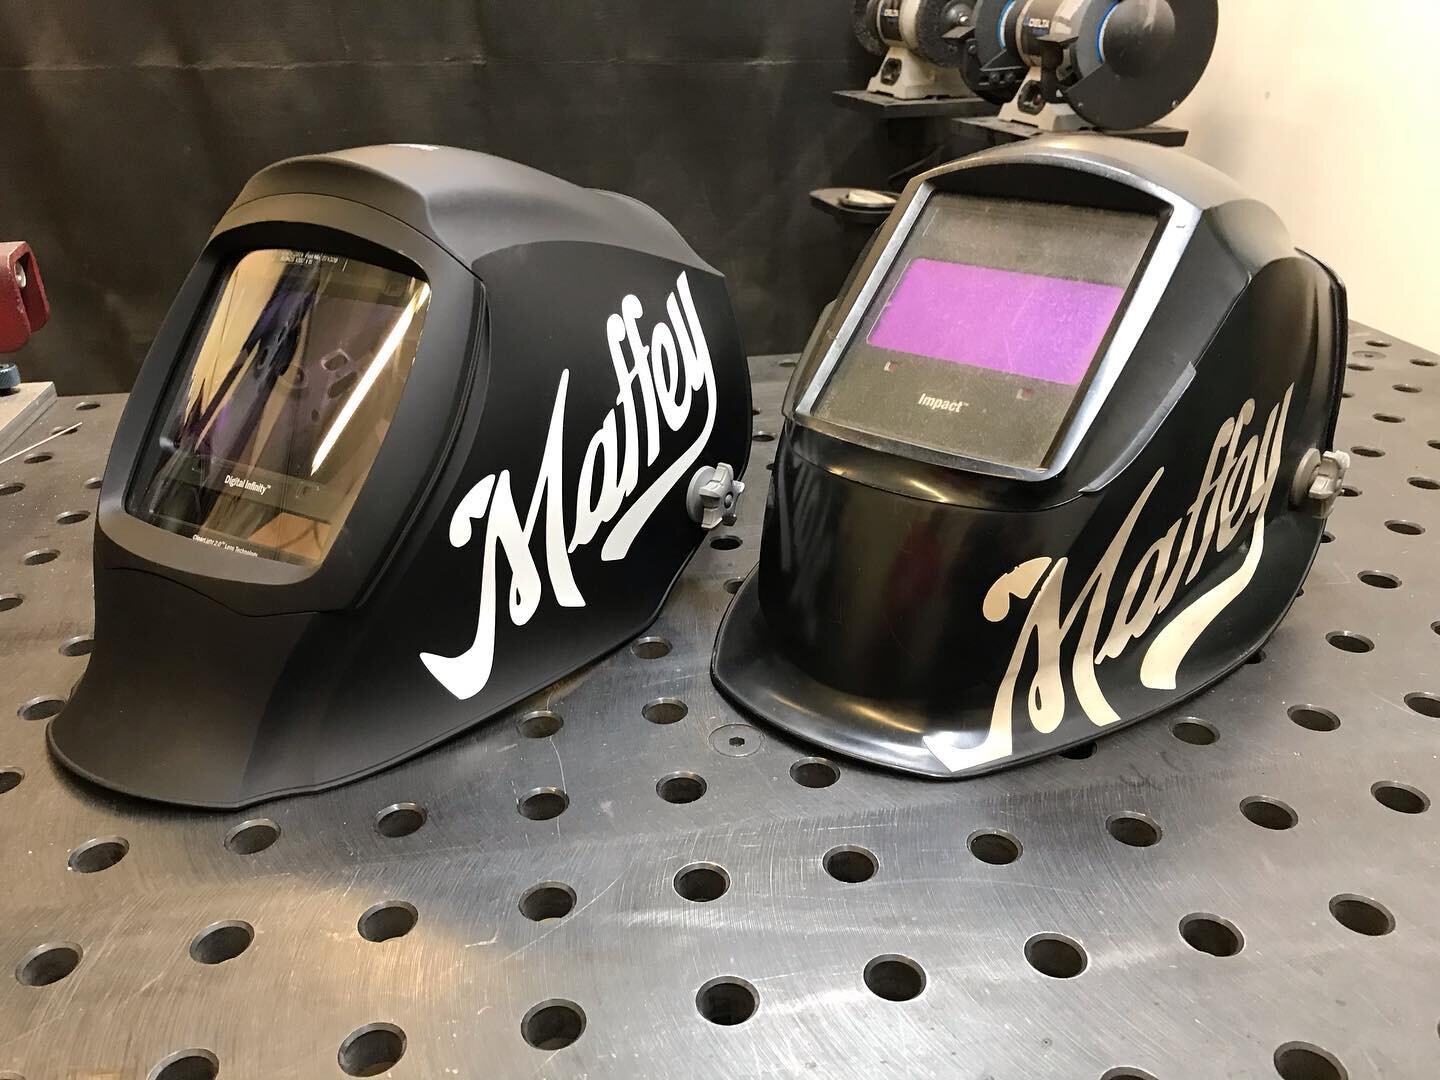 Changing of the guard for the old welding helmet. I&rsquo;ve had this Hobart Impact for 8 years now and for a cheaper helmet it&rsquo;s done me quite well. Lots of time learning and practicing under that hood. It was time to step up to this Miller Di